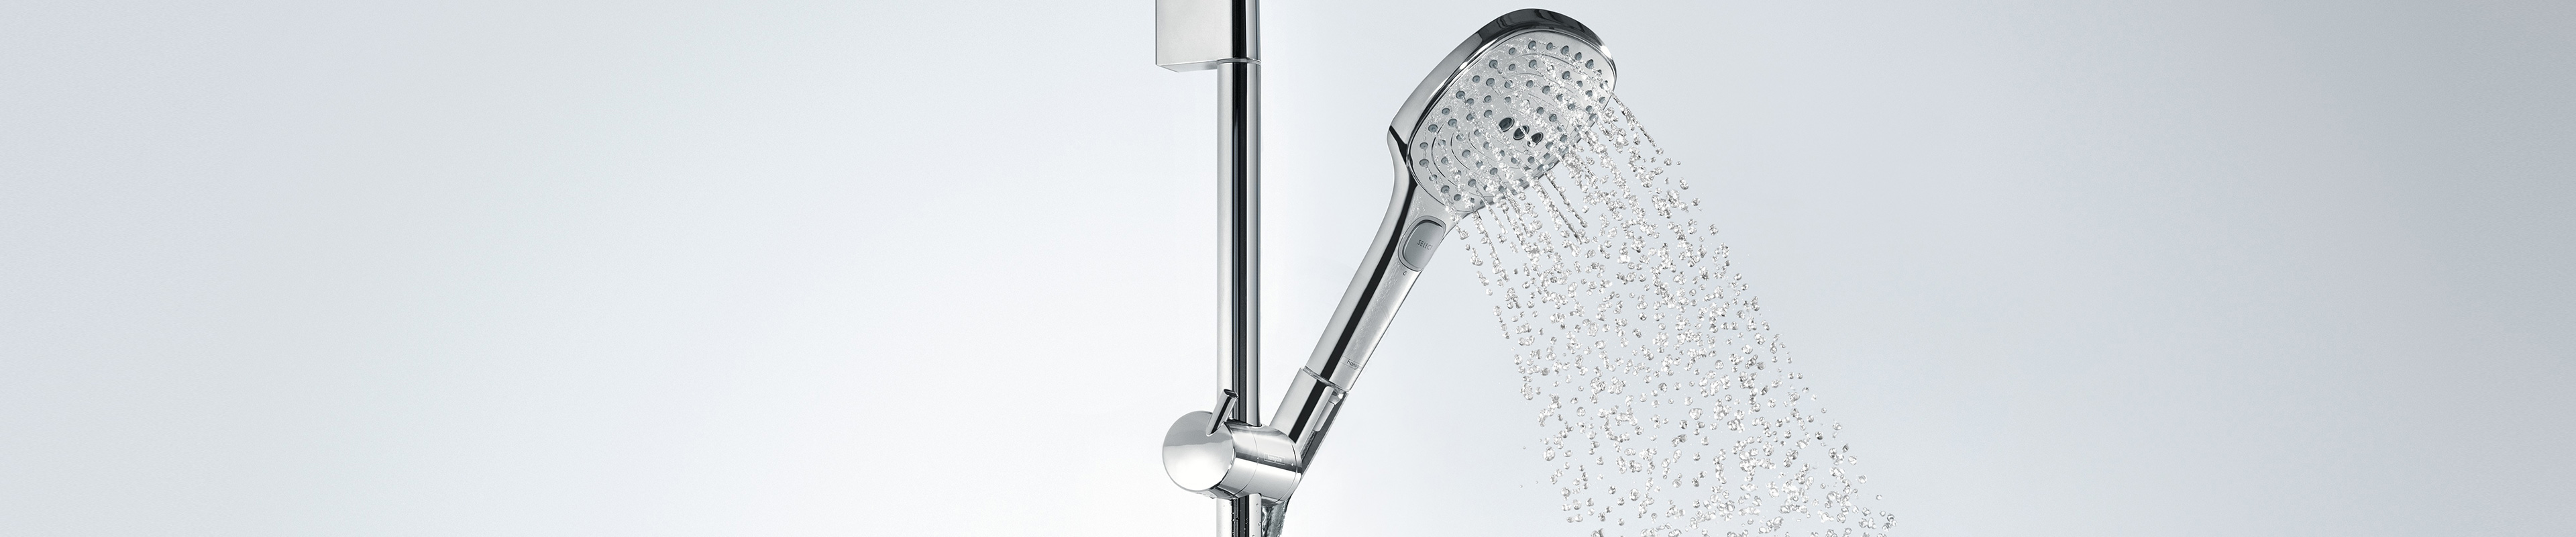 Shower bar and hand shower – the ideal shower set | hansgrohe USA